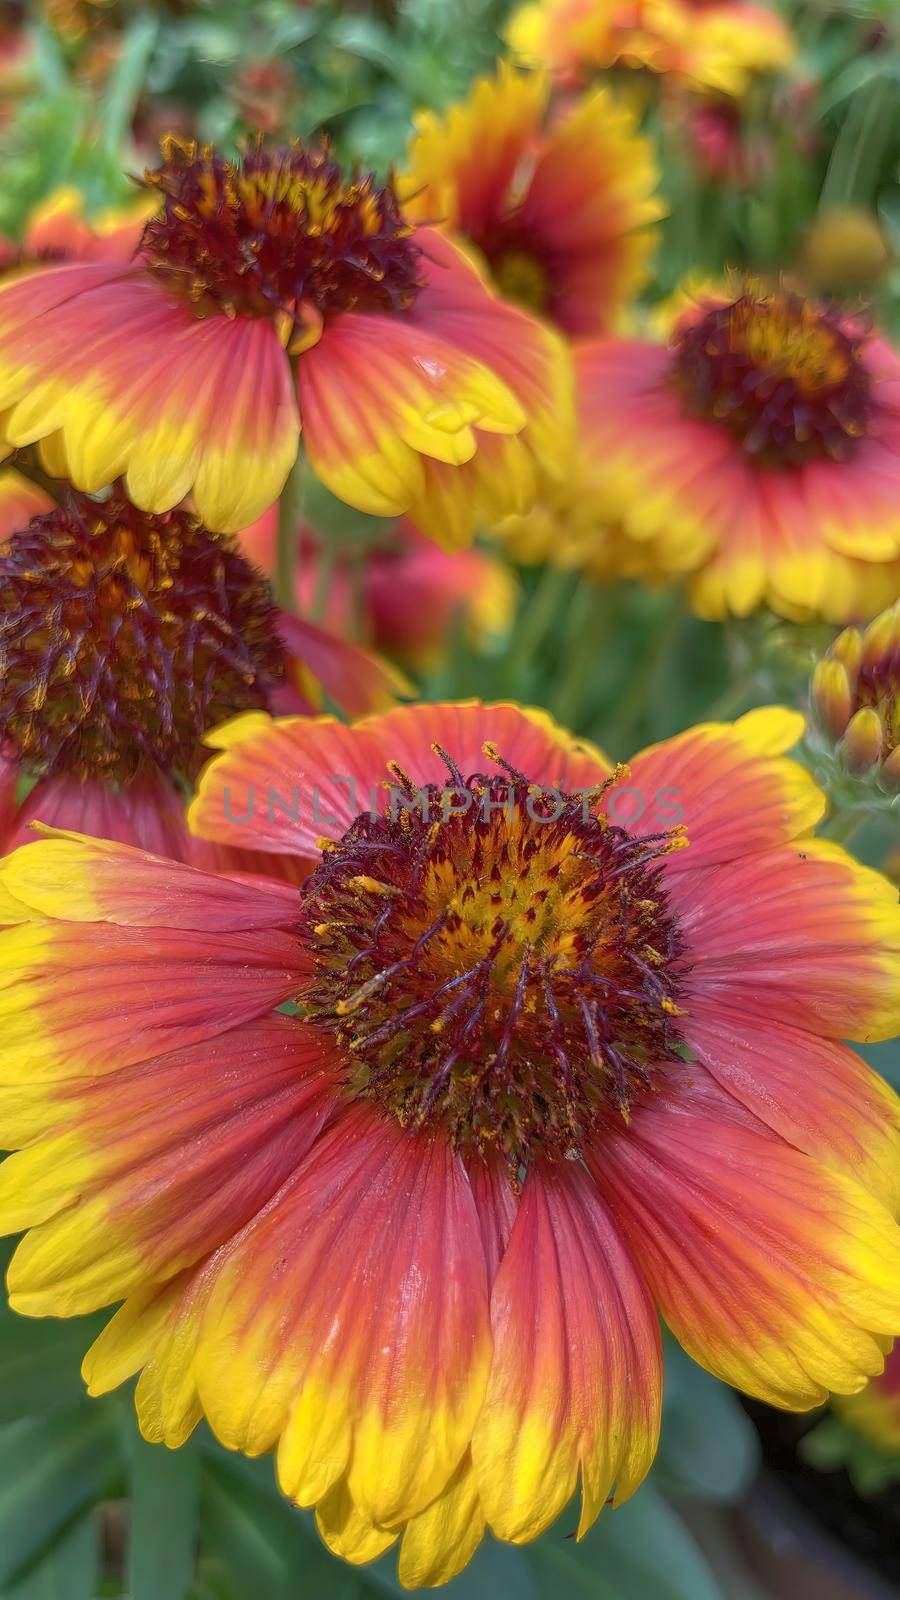 Gaillardia, common name blanket flower is a genus of flowering plants in the family Asteraceae, native to North and South America.